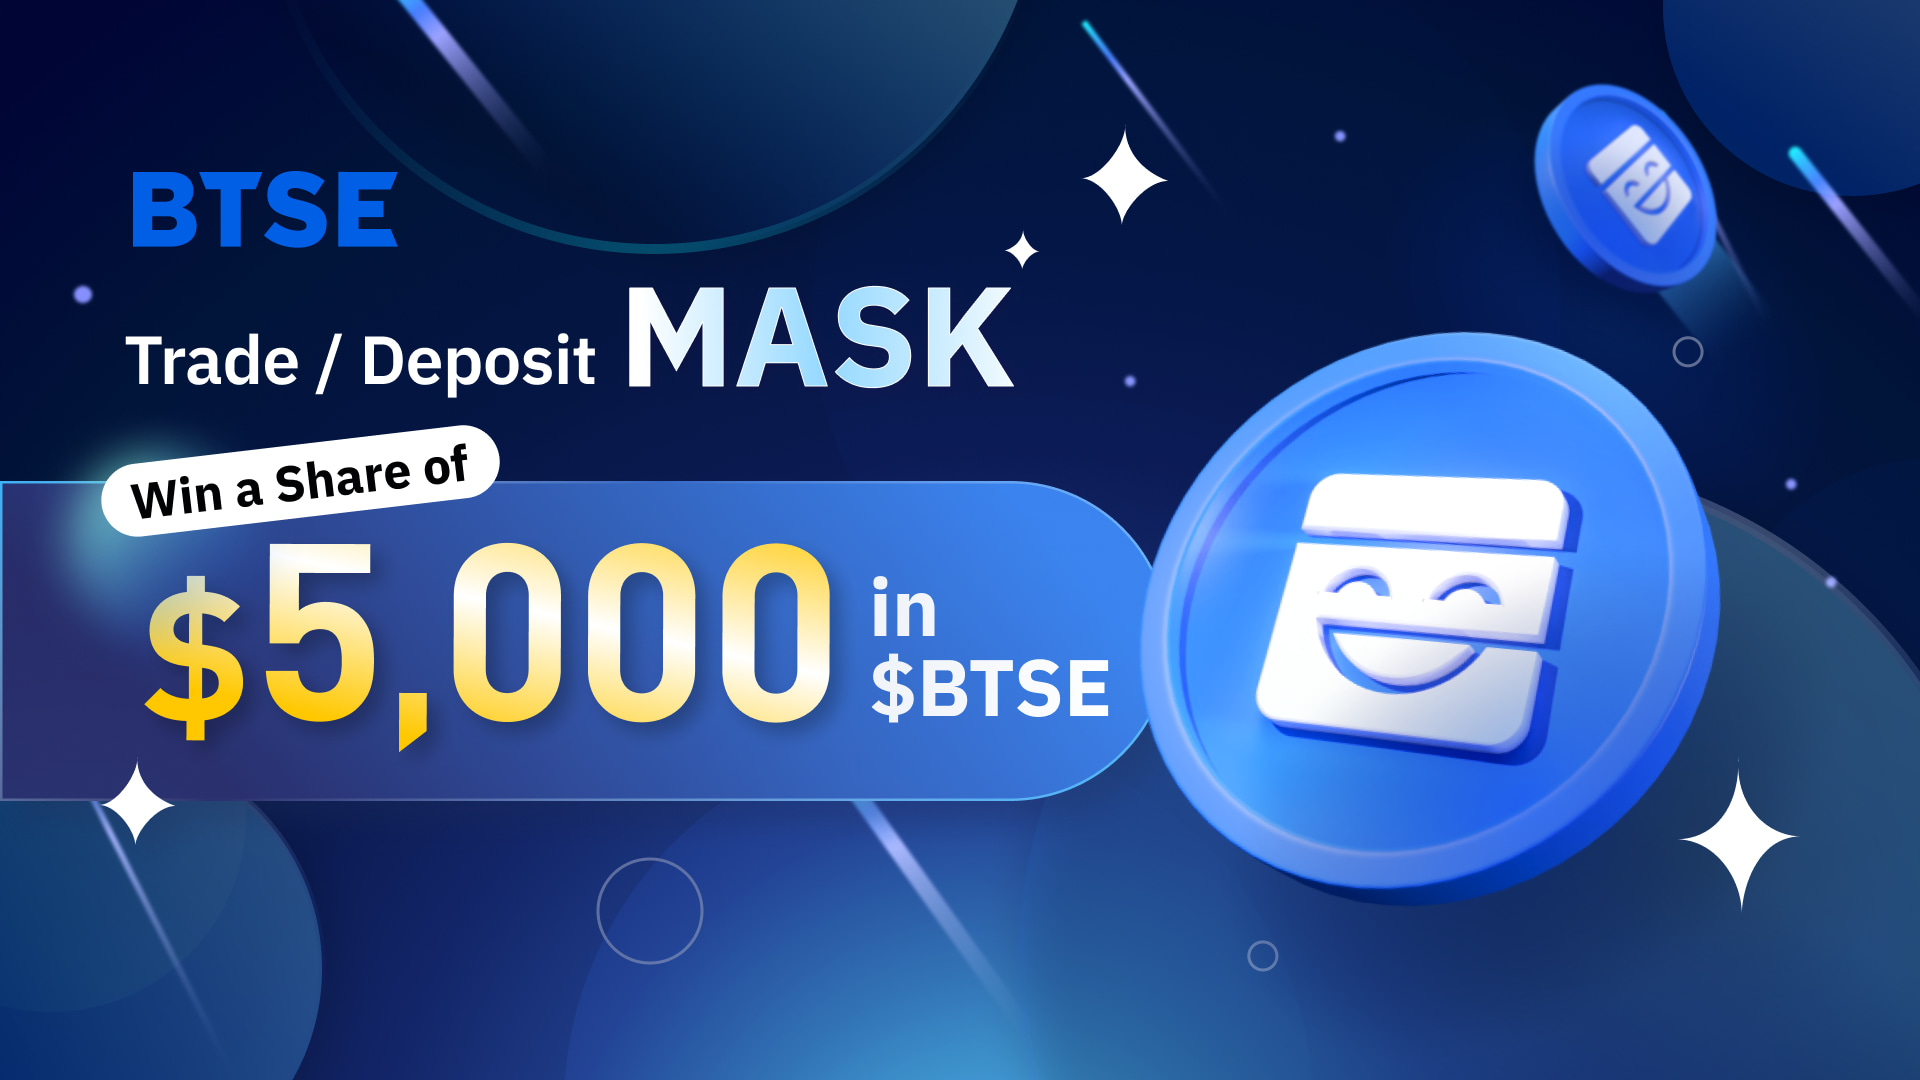 MASK Airdrop Event! Trade or Deposit to Earn $5,000 in BTSE!